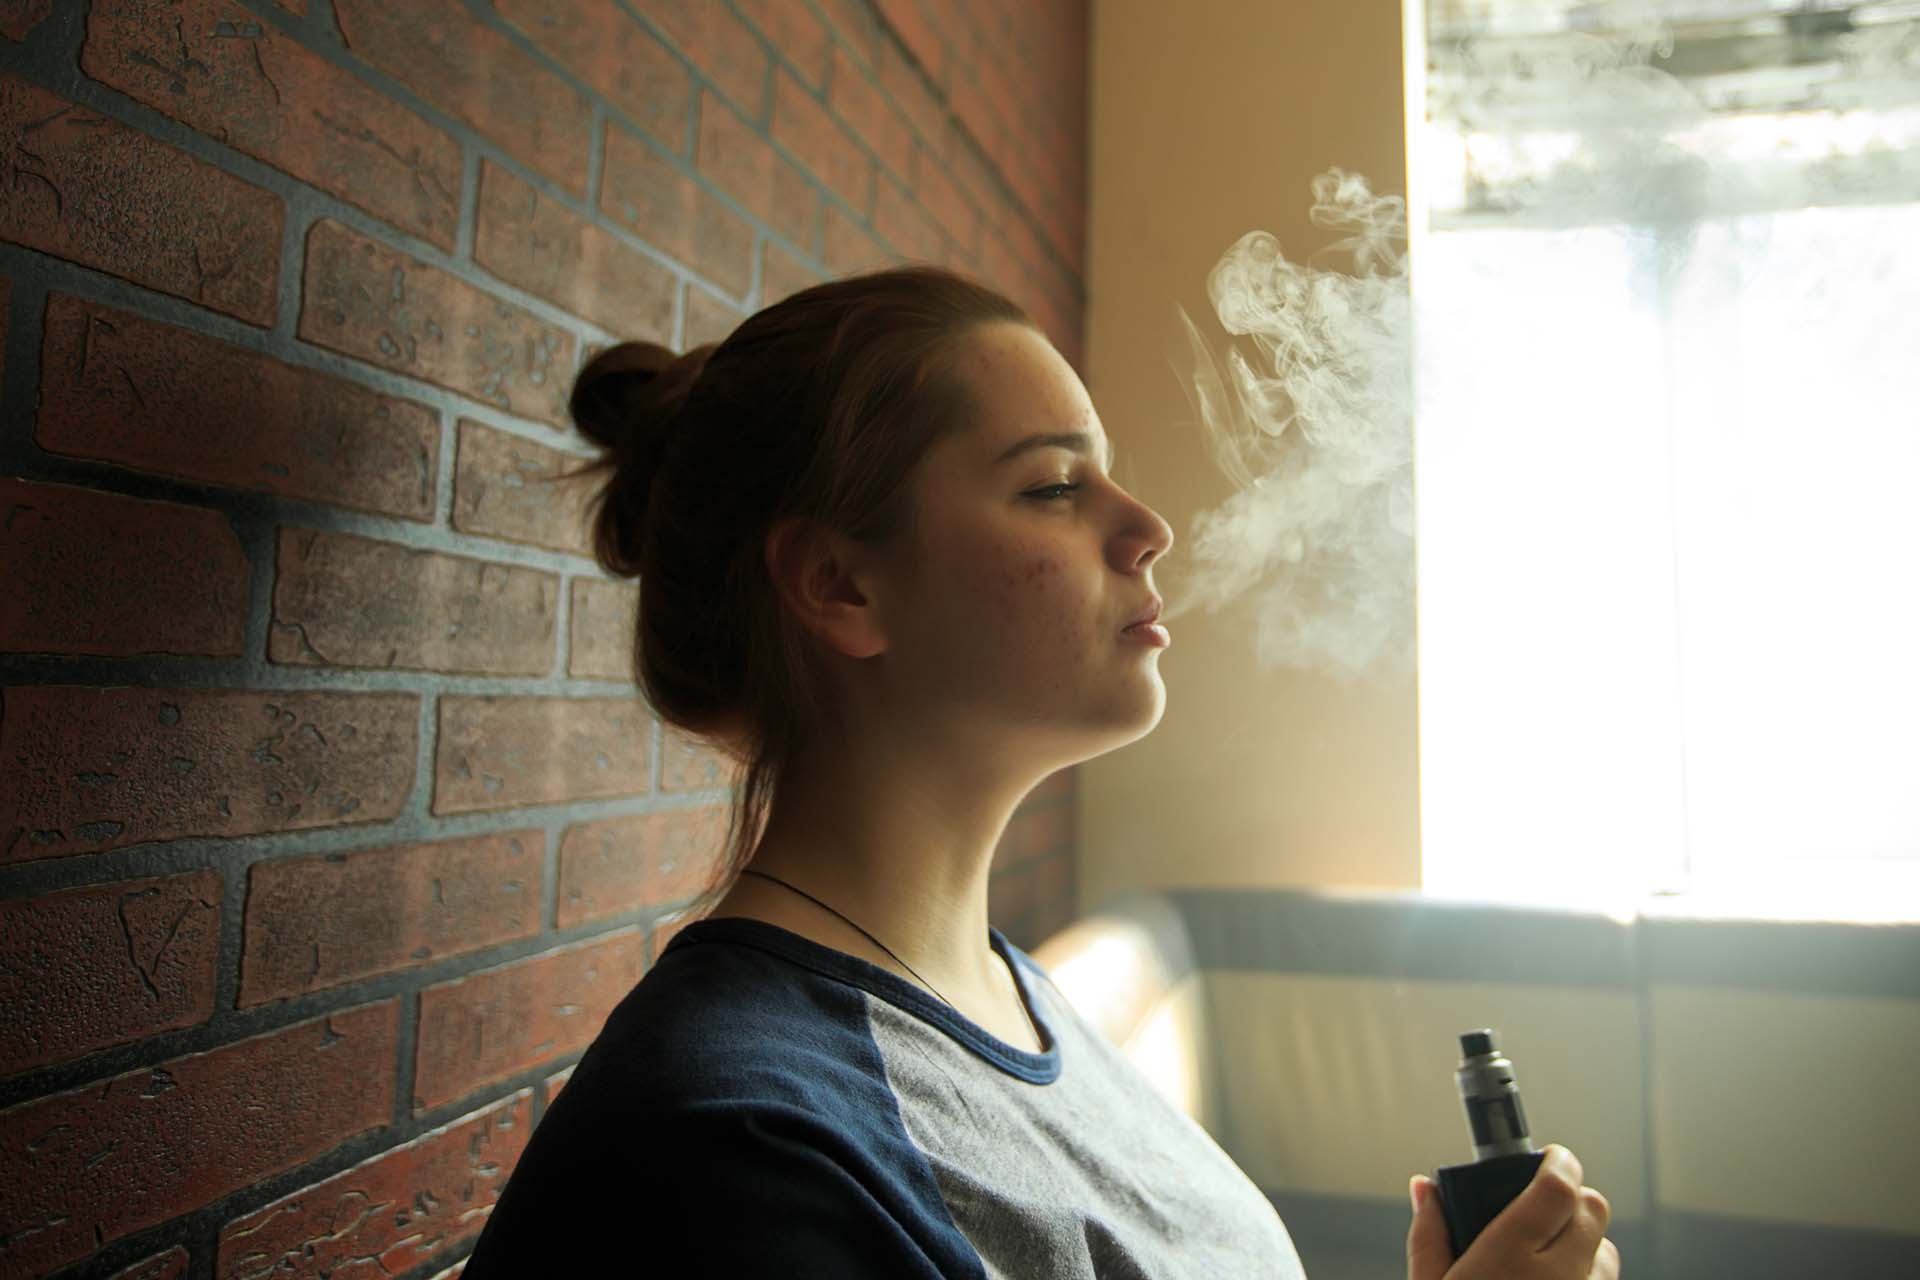 Can Vaping Help You Lose Weight? (Image)